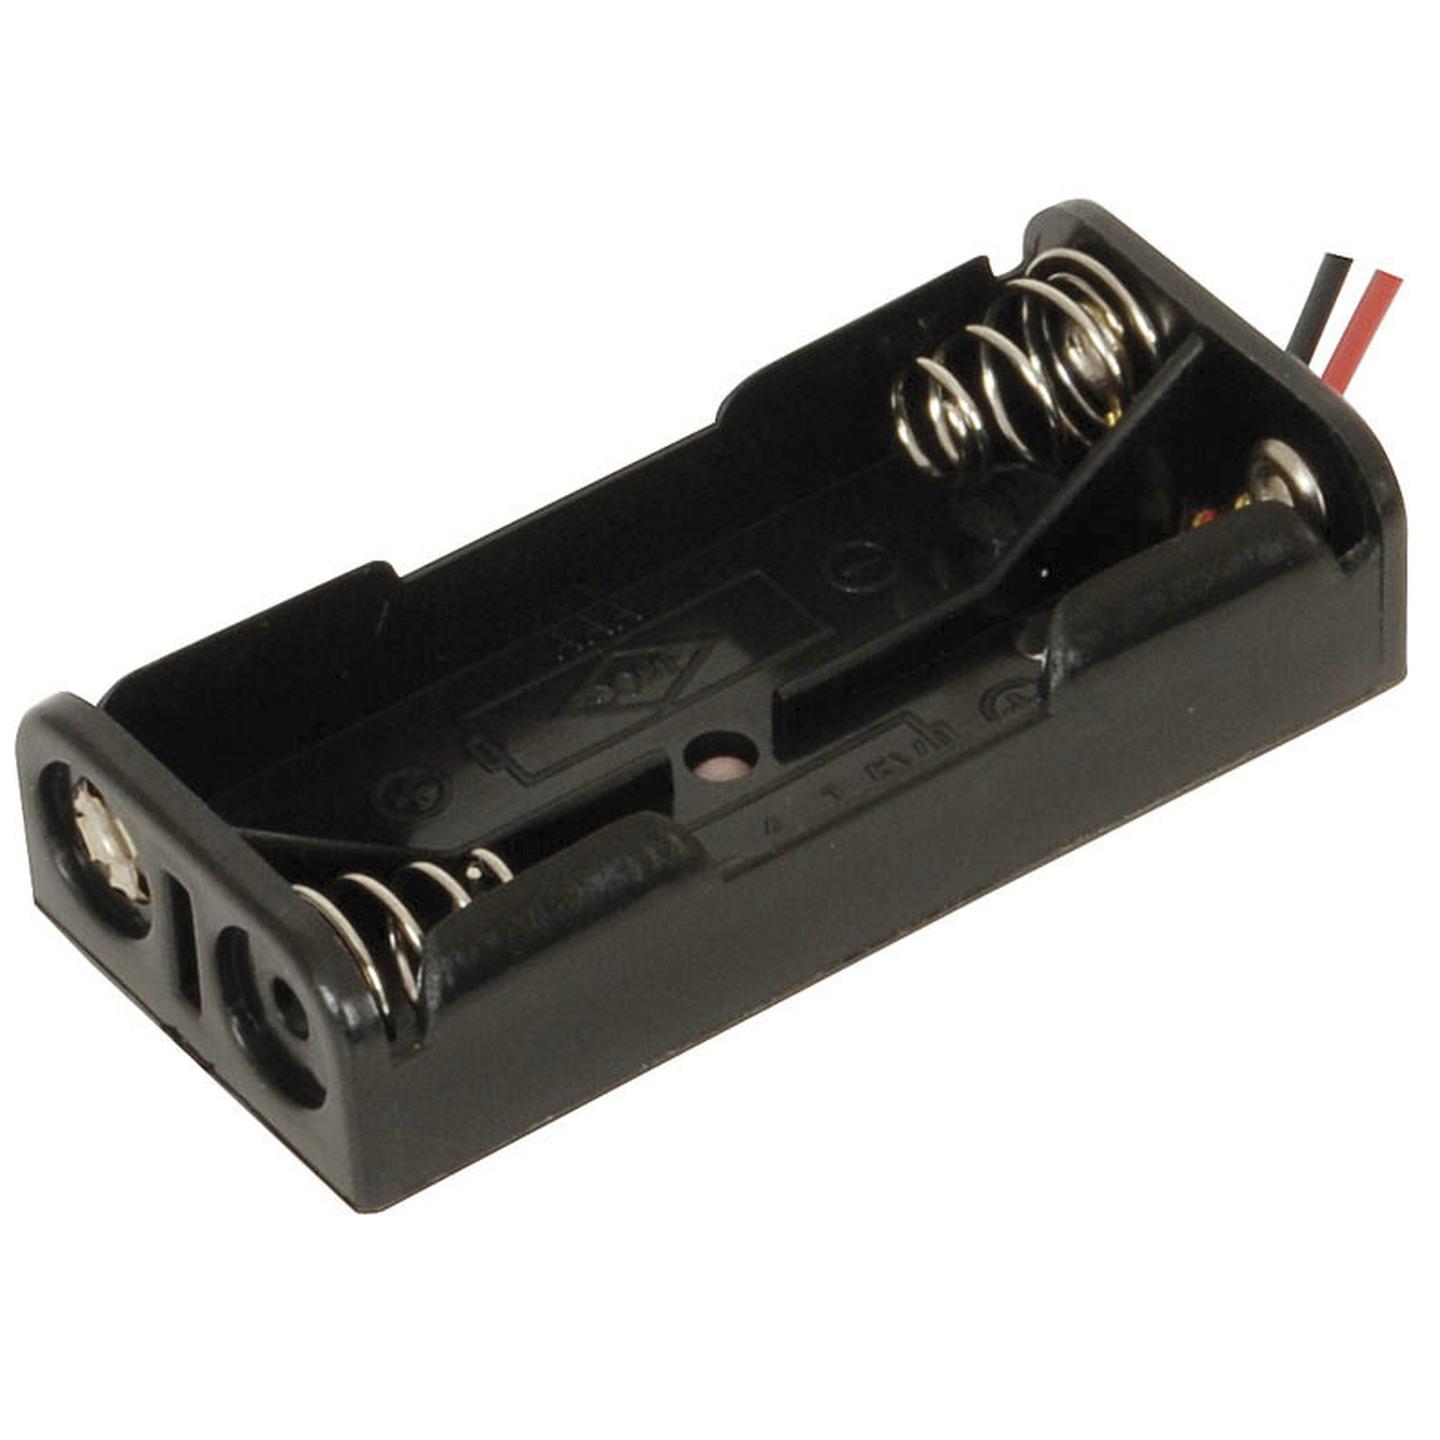 2 X AAA Cell Battery Holder